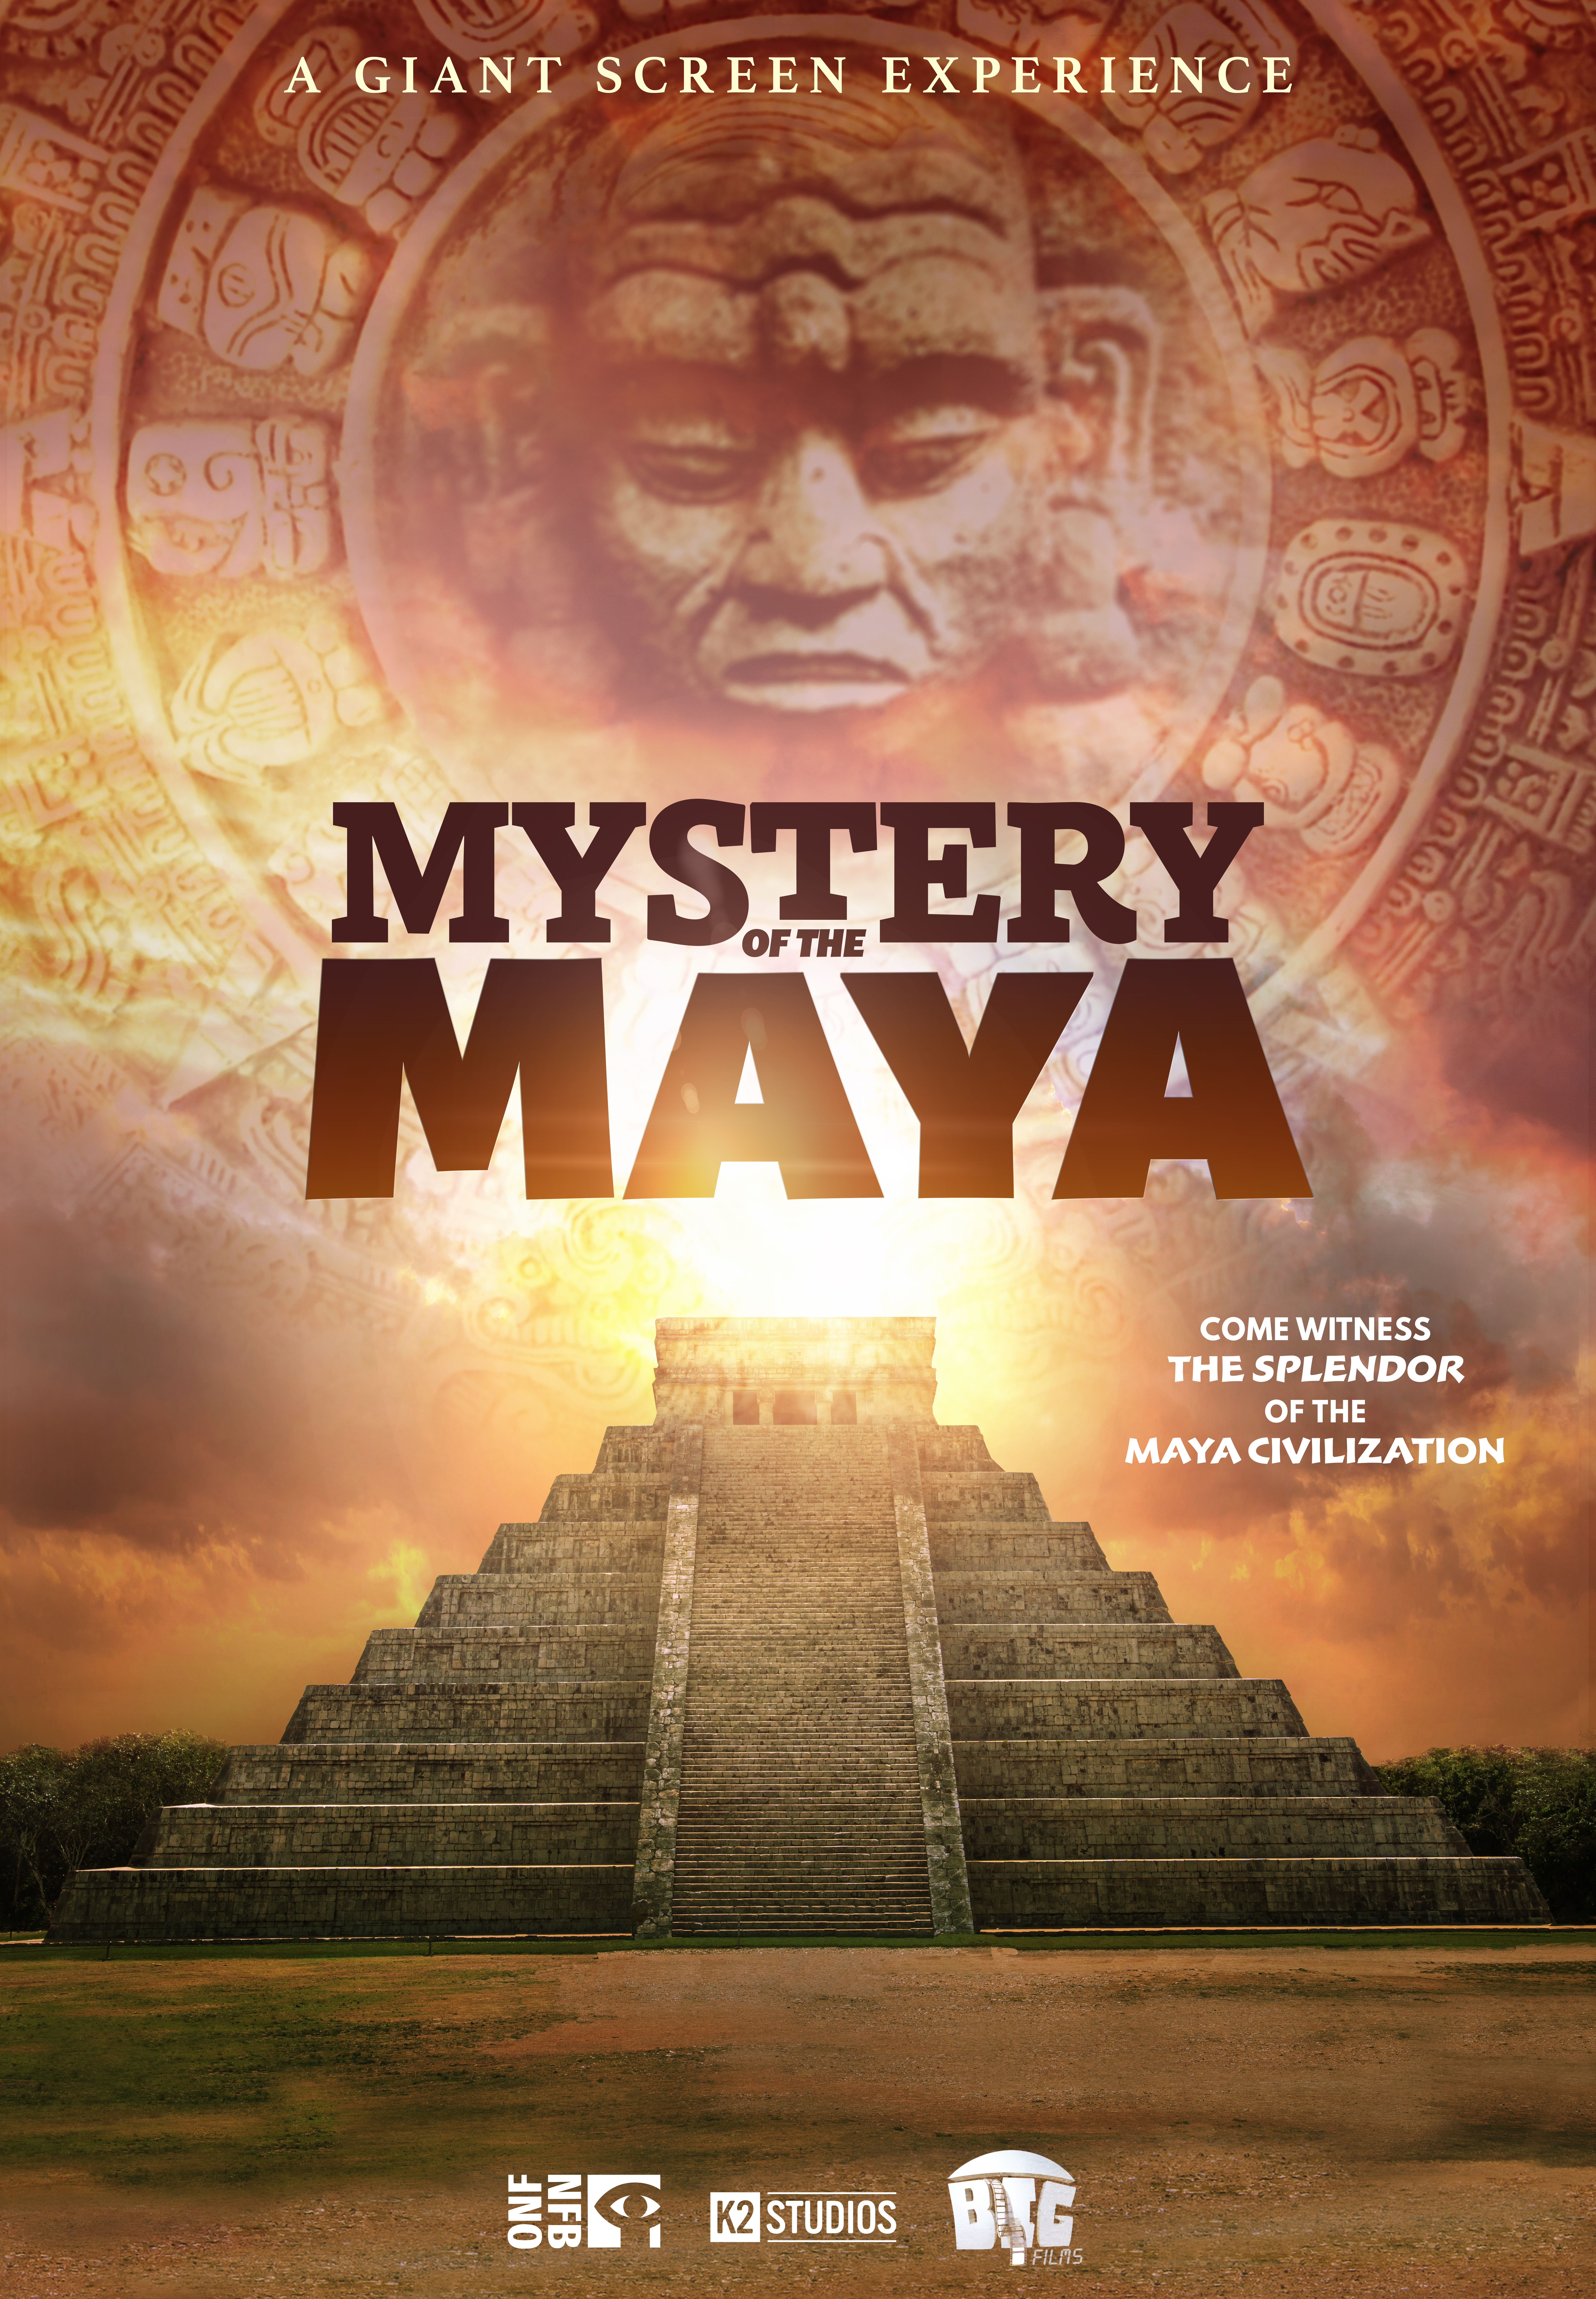 Maya pyramid with rising sun in the background with symbol above. Mystery of the Maya title overlay.